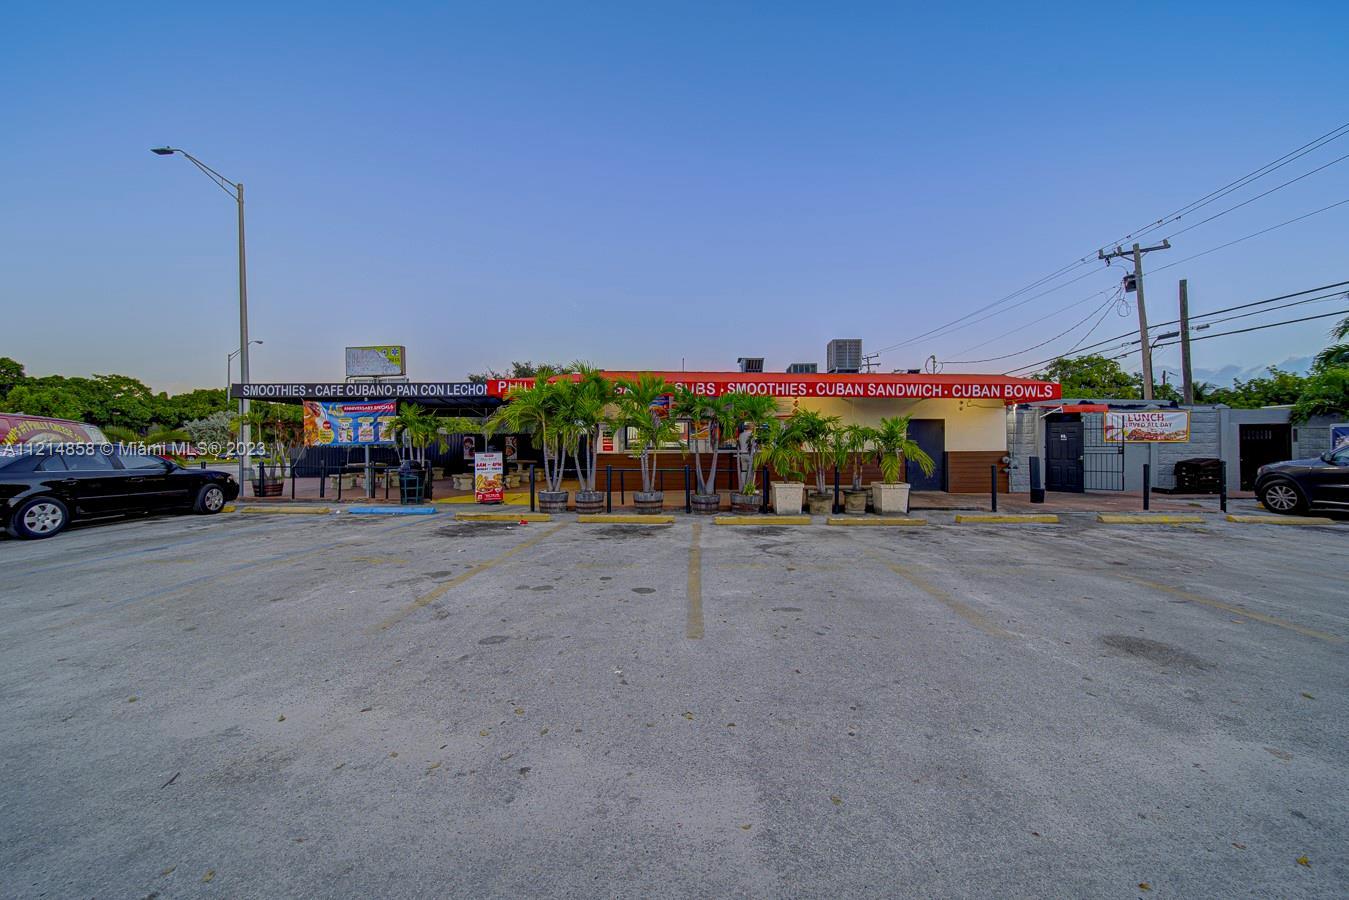 Photo of 11011 NW 27th Ave in Miami, FL